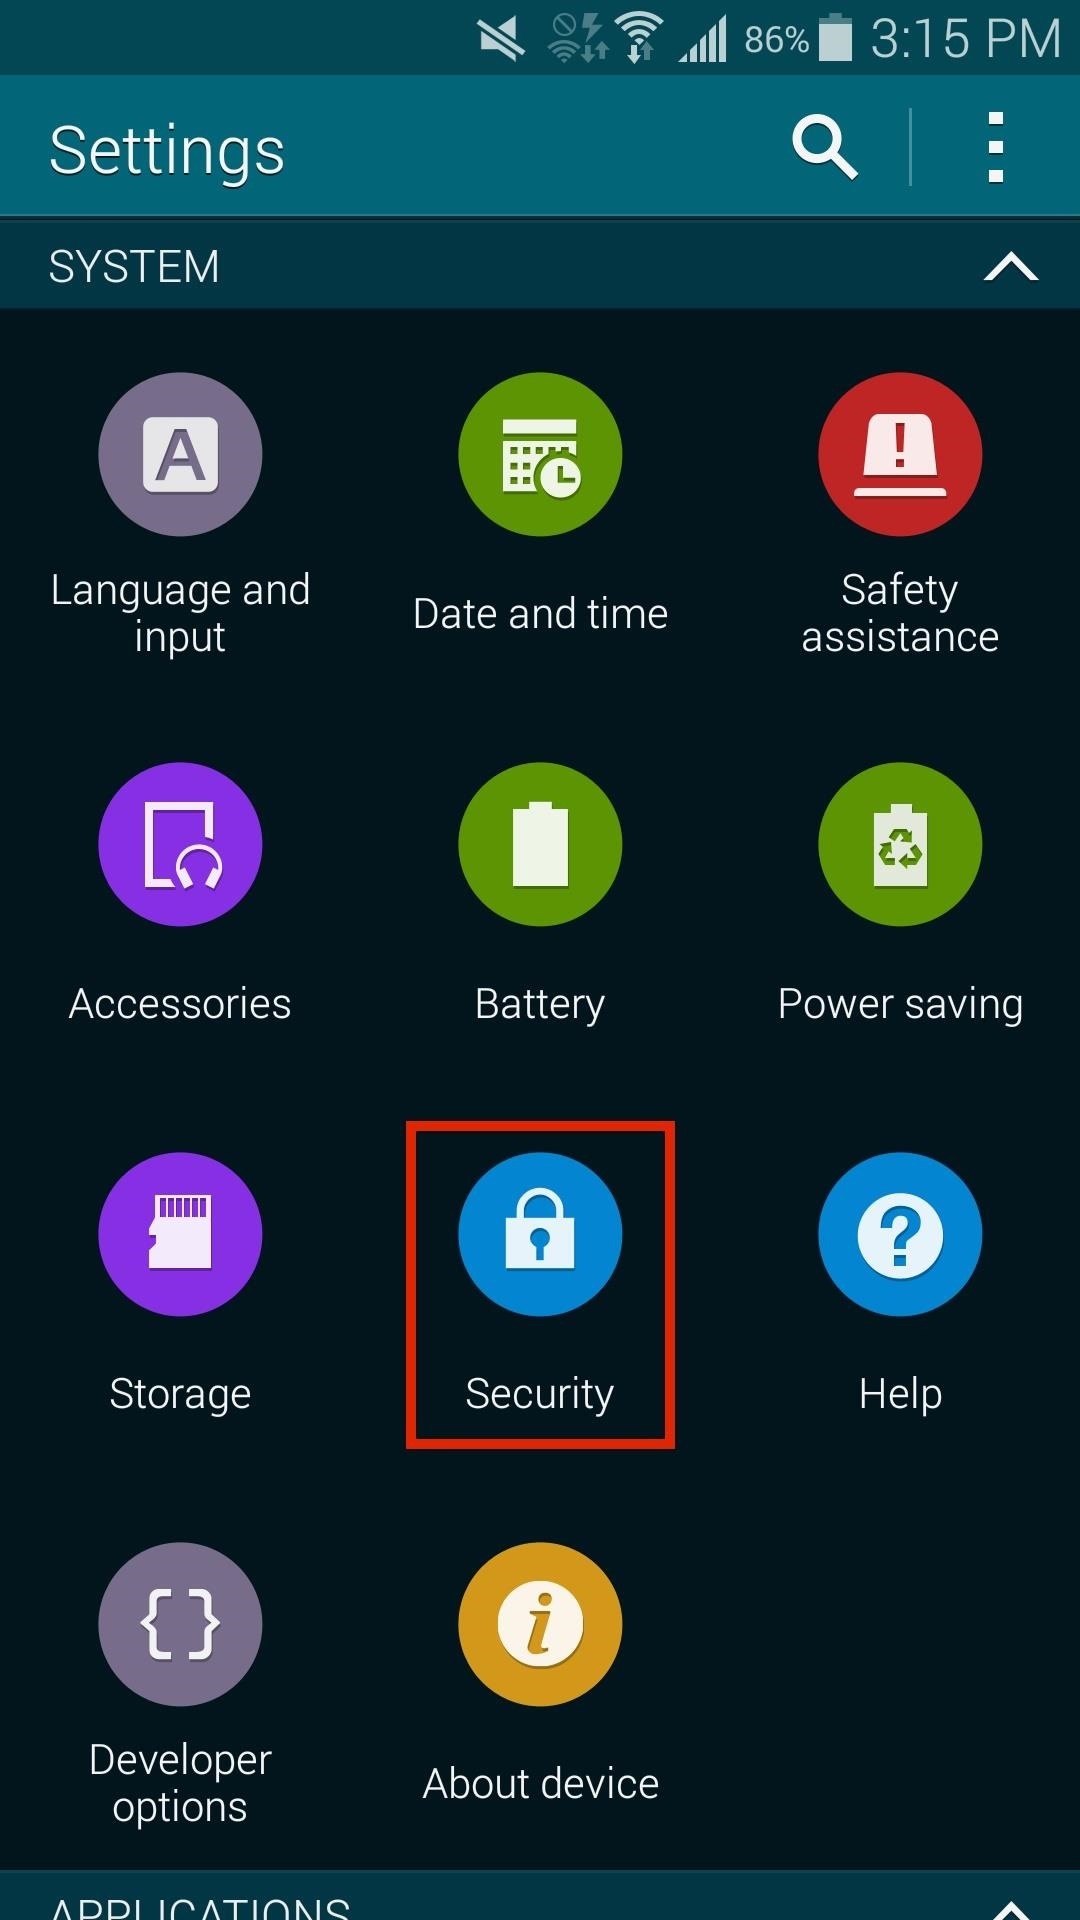 How to Enable "Unknown Sources" So You Can Download Third-Party Apps to Your Galaxy S5